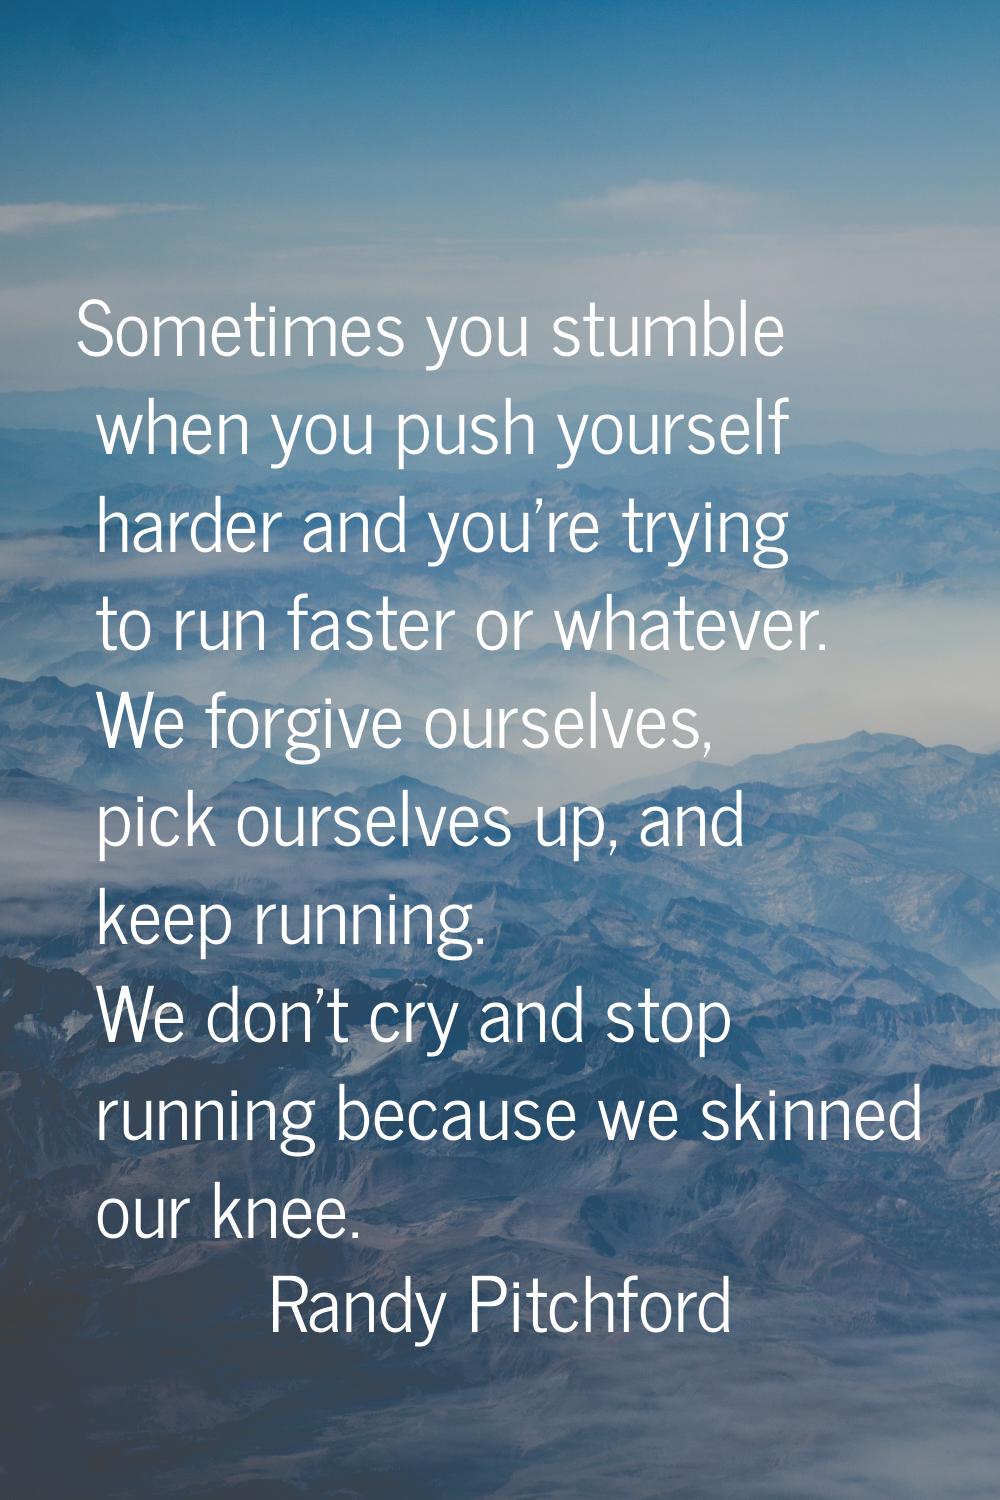 Sometimes you stumble when you push yourself harder and you're trying to run faster or whatever. We